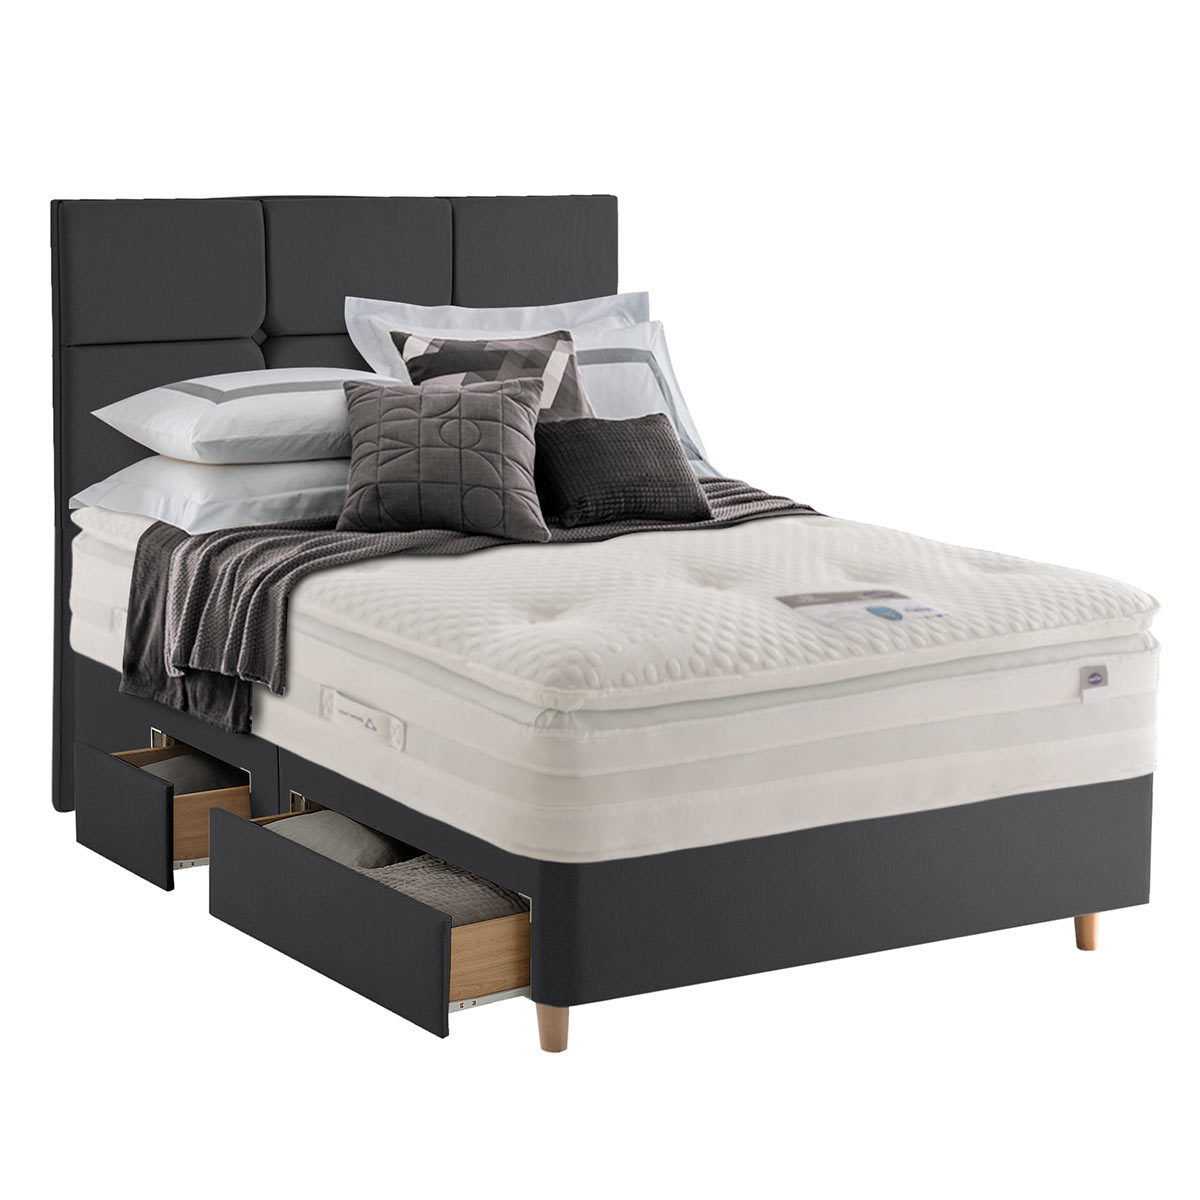 Cut out image of ebony divan and headboard with mattress (not included)